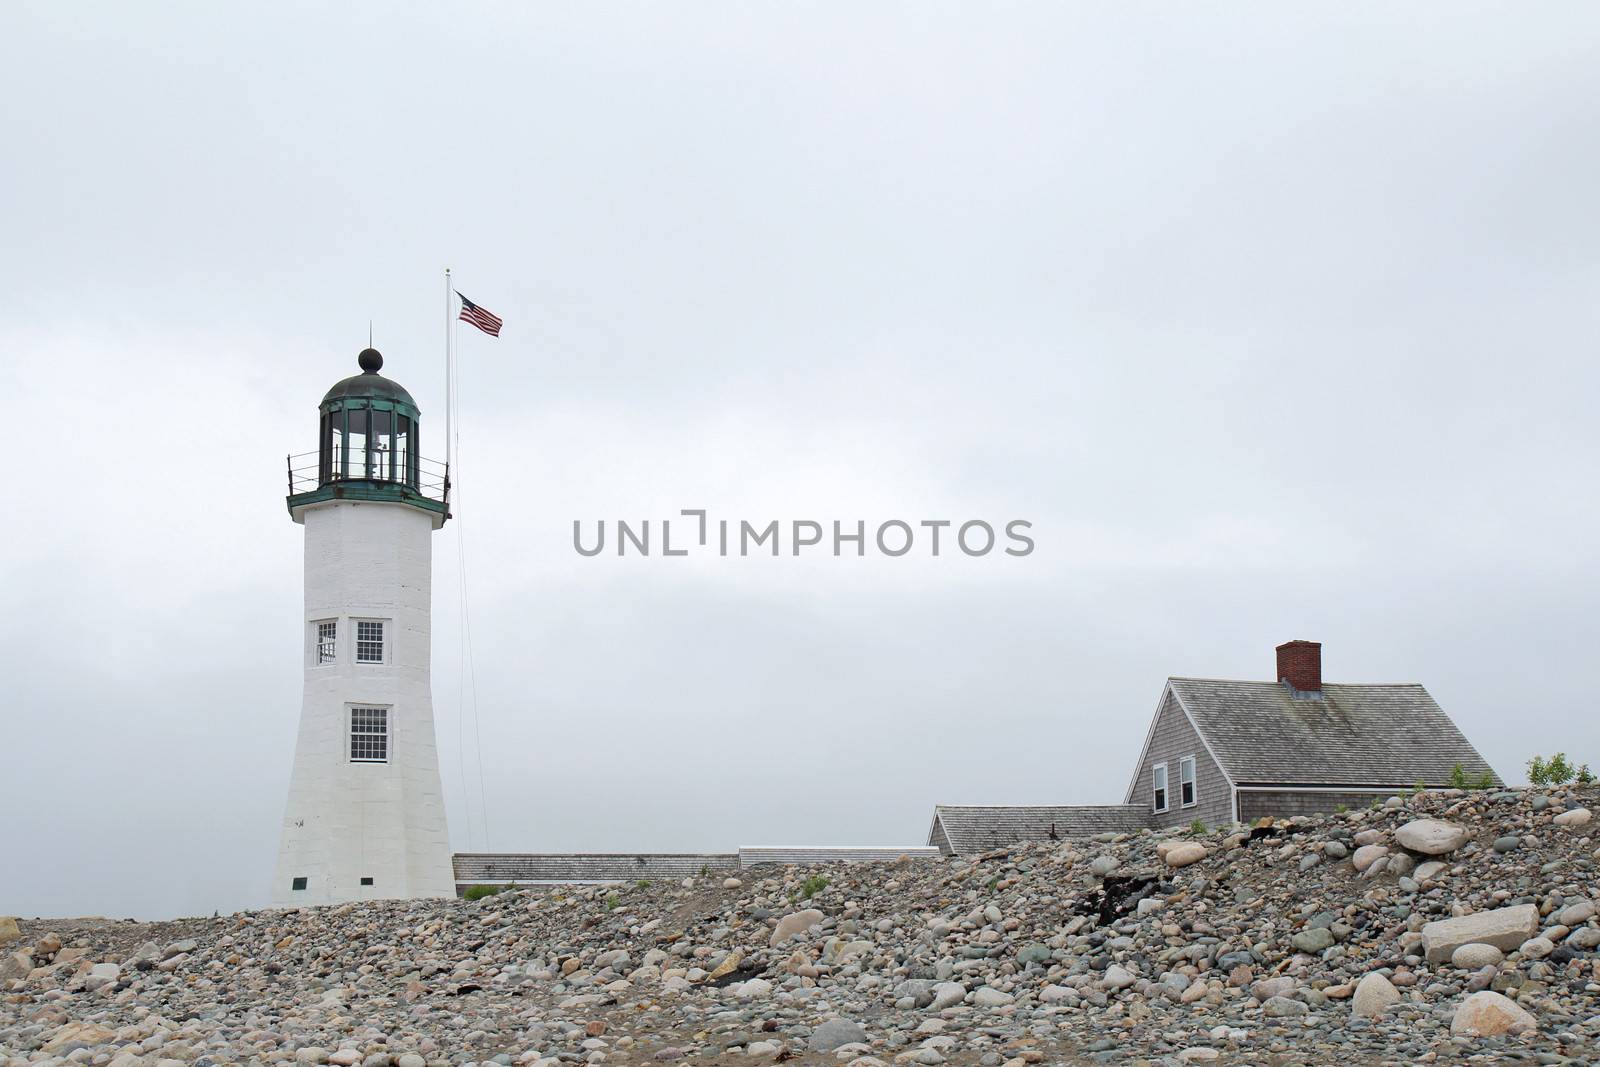 The historic Scituate Light was built in 1811 and is the 11th oldest lighthouse in the United States